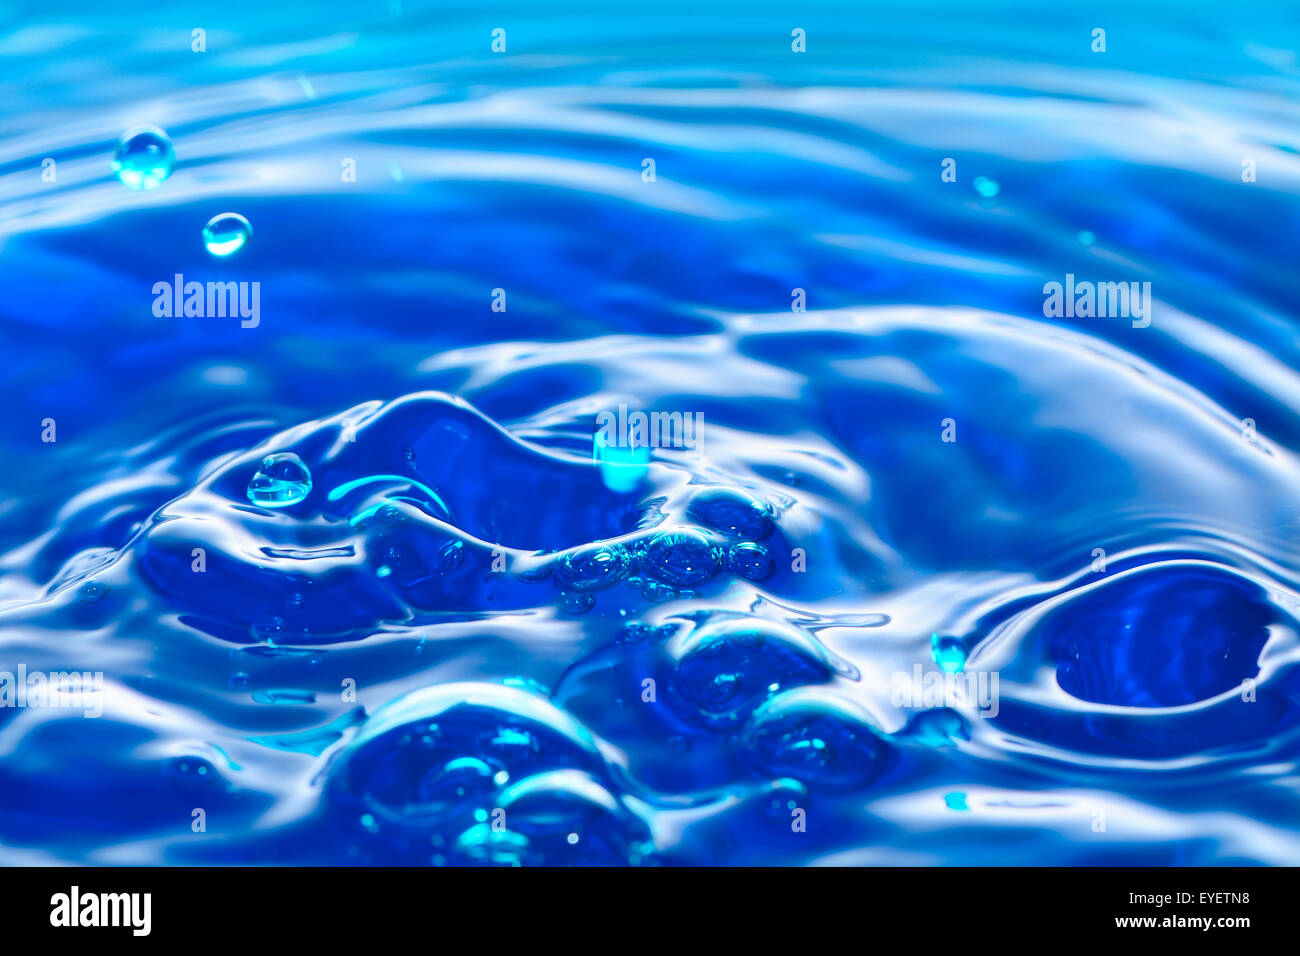 Colorful blue water droplet, fresh background abstract Stock Photo